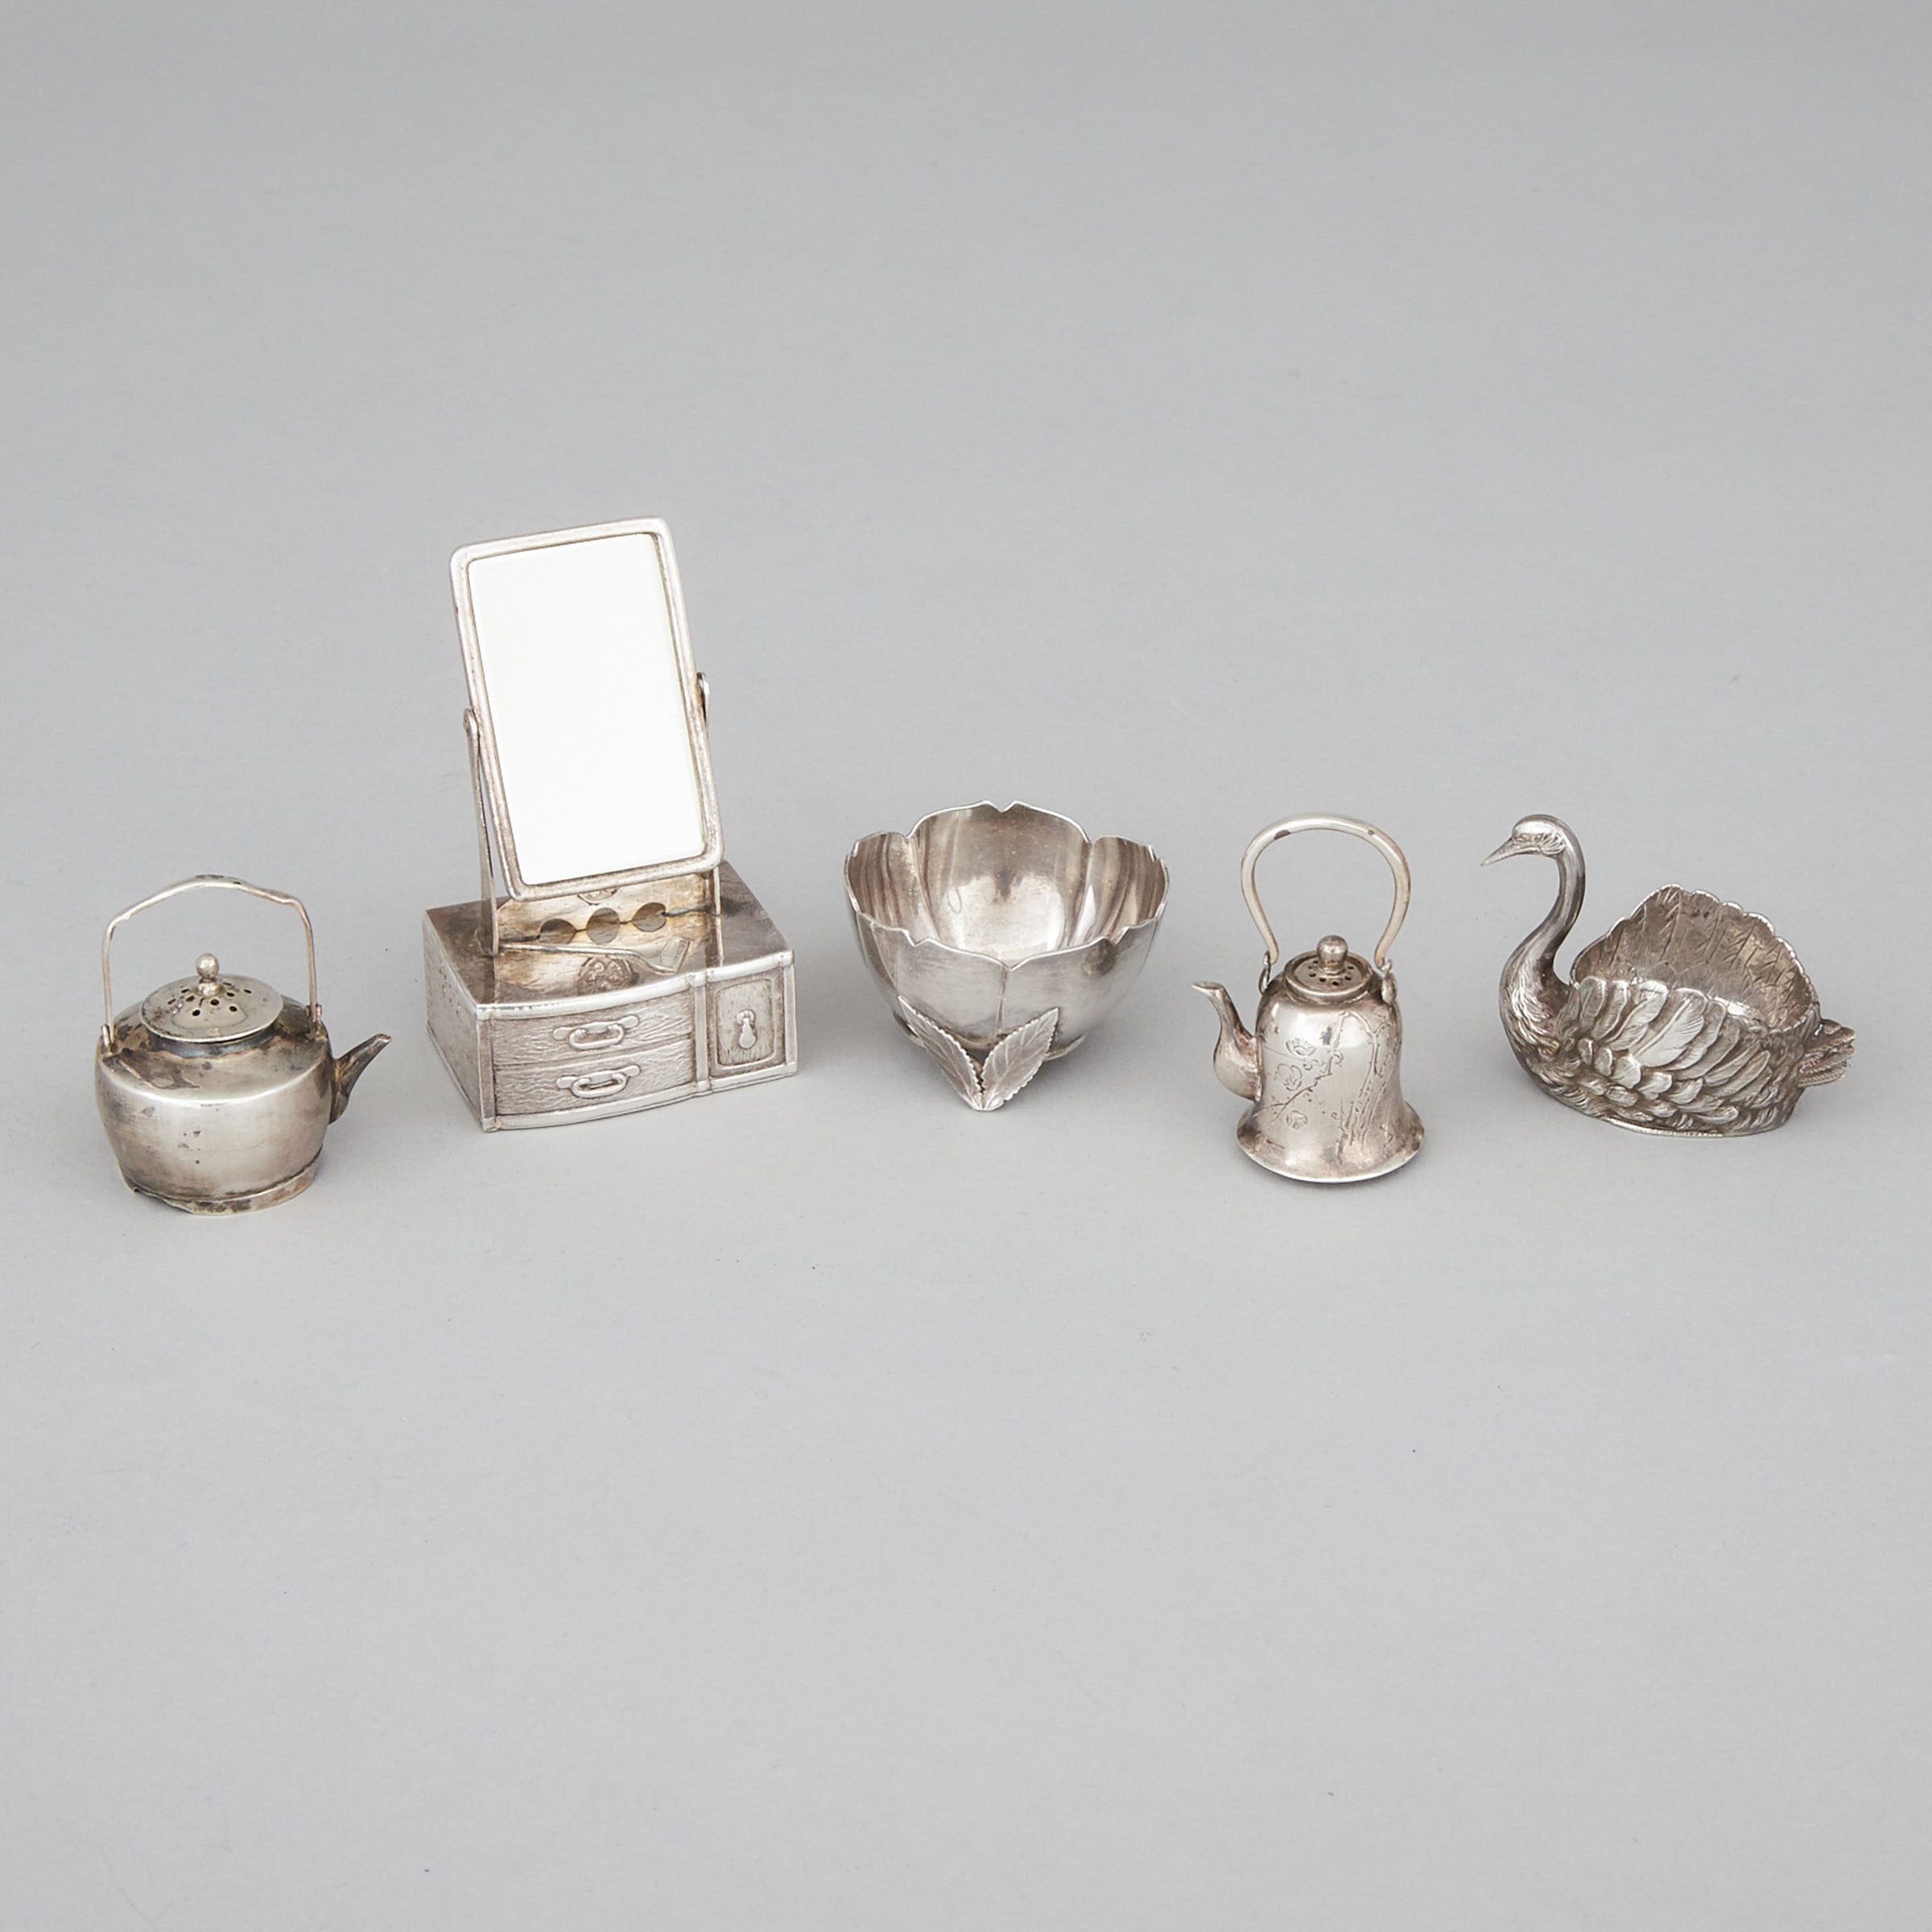 Three Asian Silver Novelty Pepper Casters and Two Salt Cellars, early 20th century